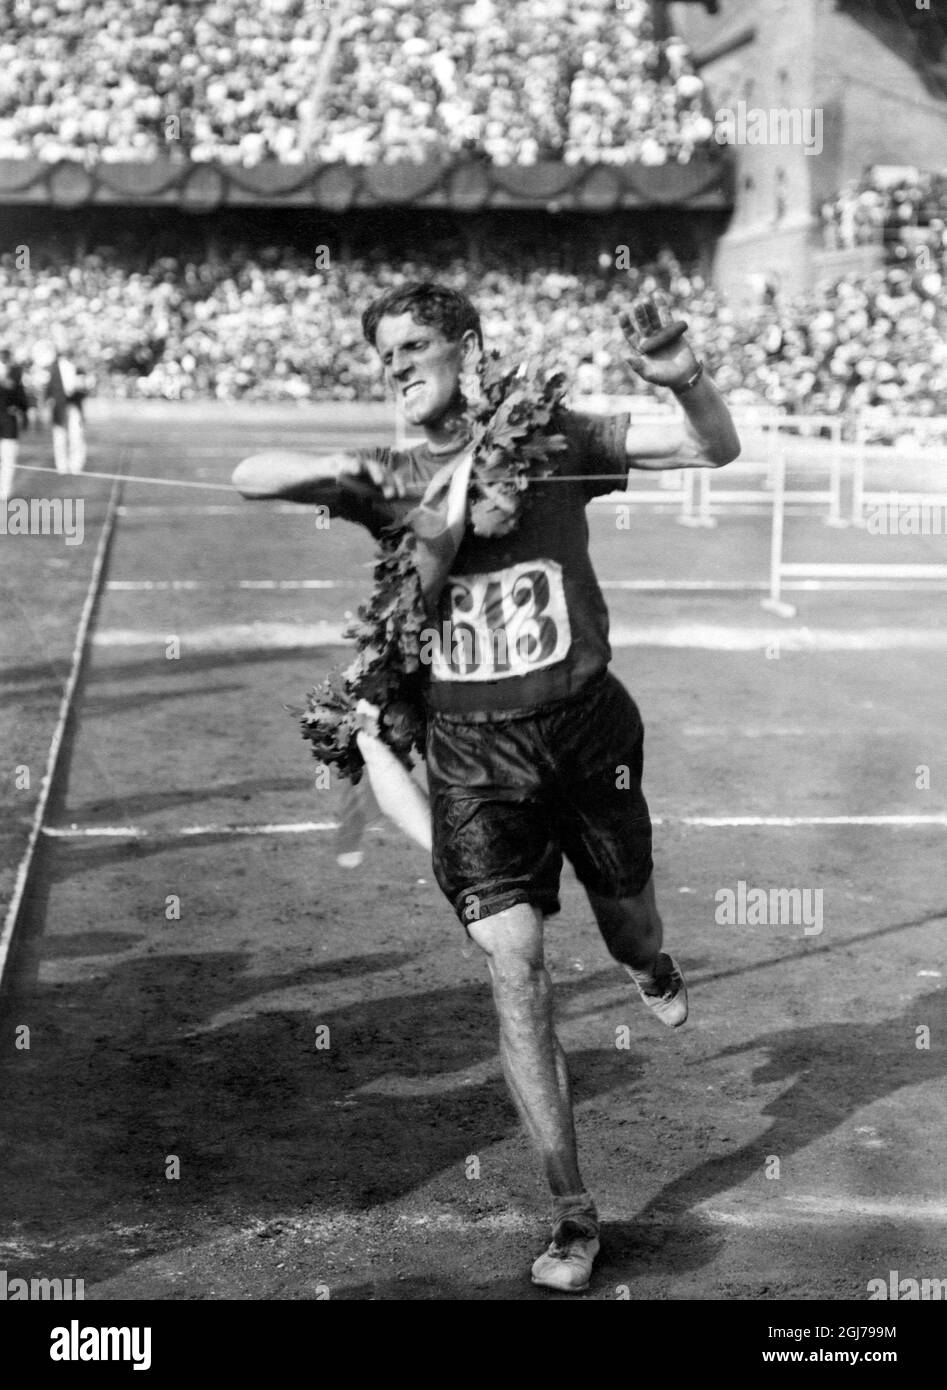 FILE 1912 The winner of the Marathon race, South African, Ken McArthur passes the finishing line in the Stadium, Stockholm Stadion at the Olympic Games in Stockholm 1912. Foto:Scanpix Historical/ Kod:1900 Scanpix SWEDEN Stock Photo